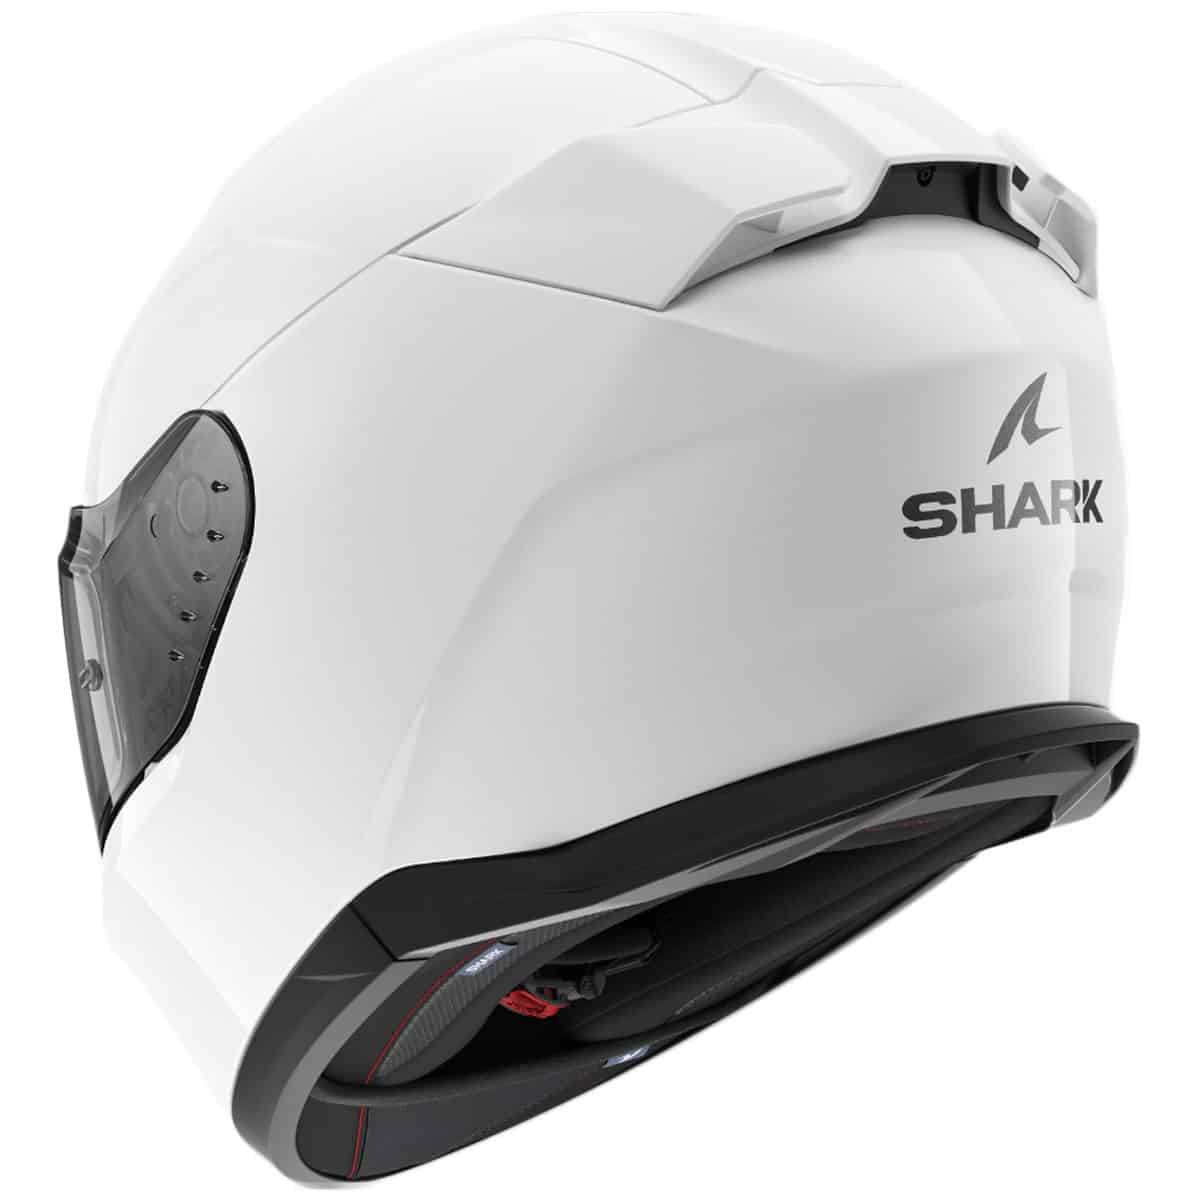 The Shark D-Skwal 3 full face helmet is the perfect combination of style, stability and safety. Its aggressive design with aerodynamic spoilers gives you an unbeatable look as you take to the streets - back